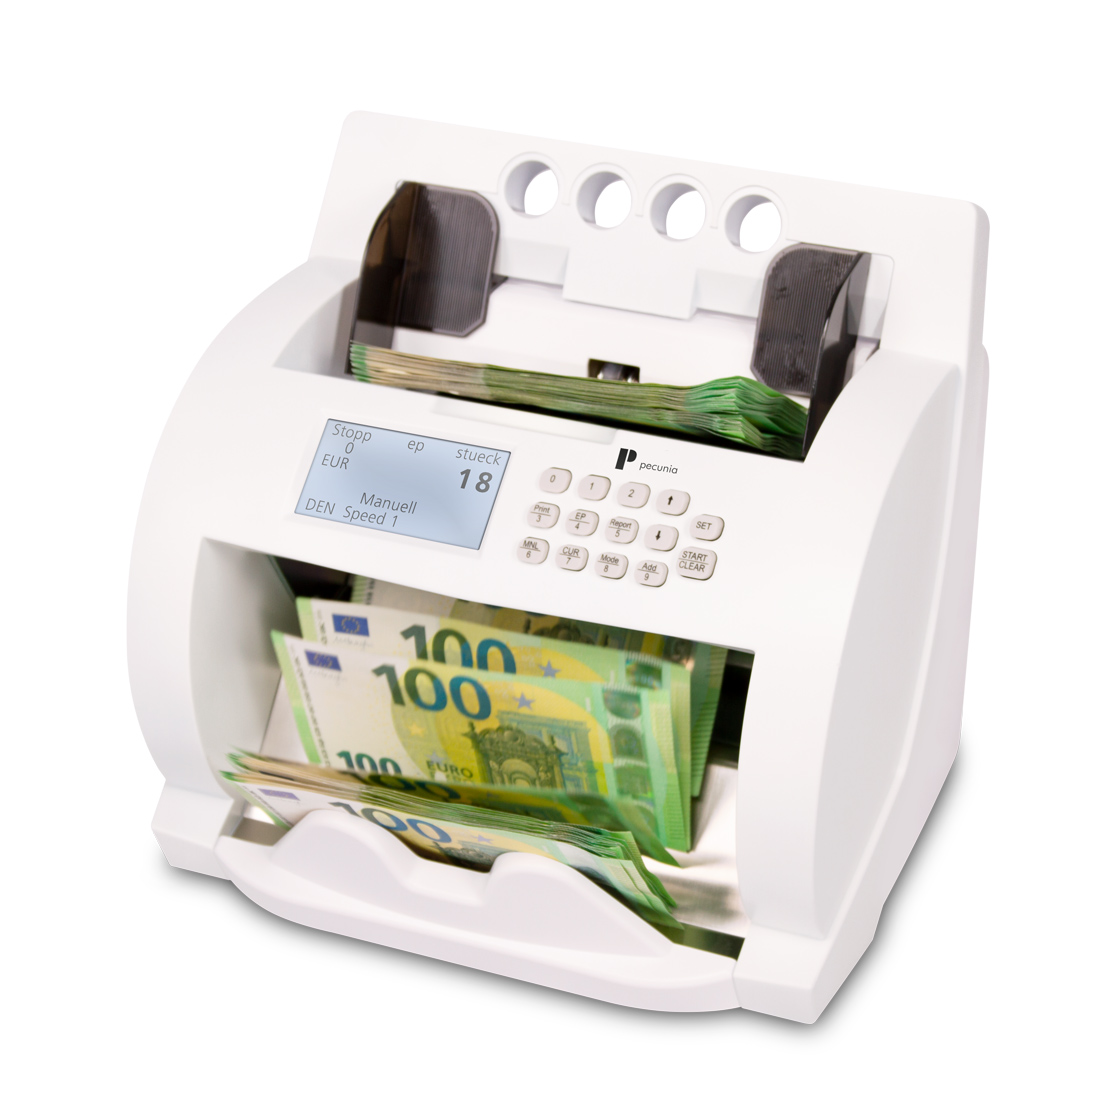 Banknotenzähler Pecunia PC 900 S